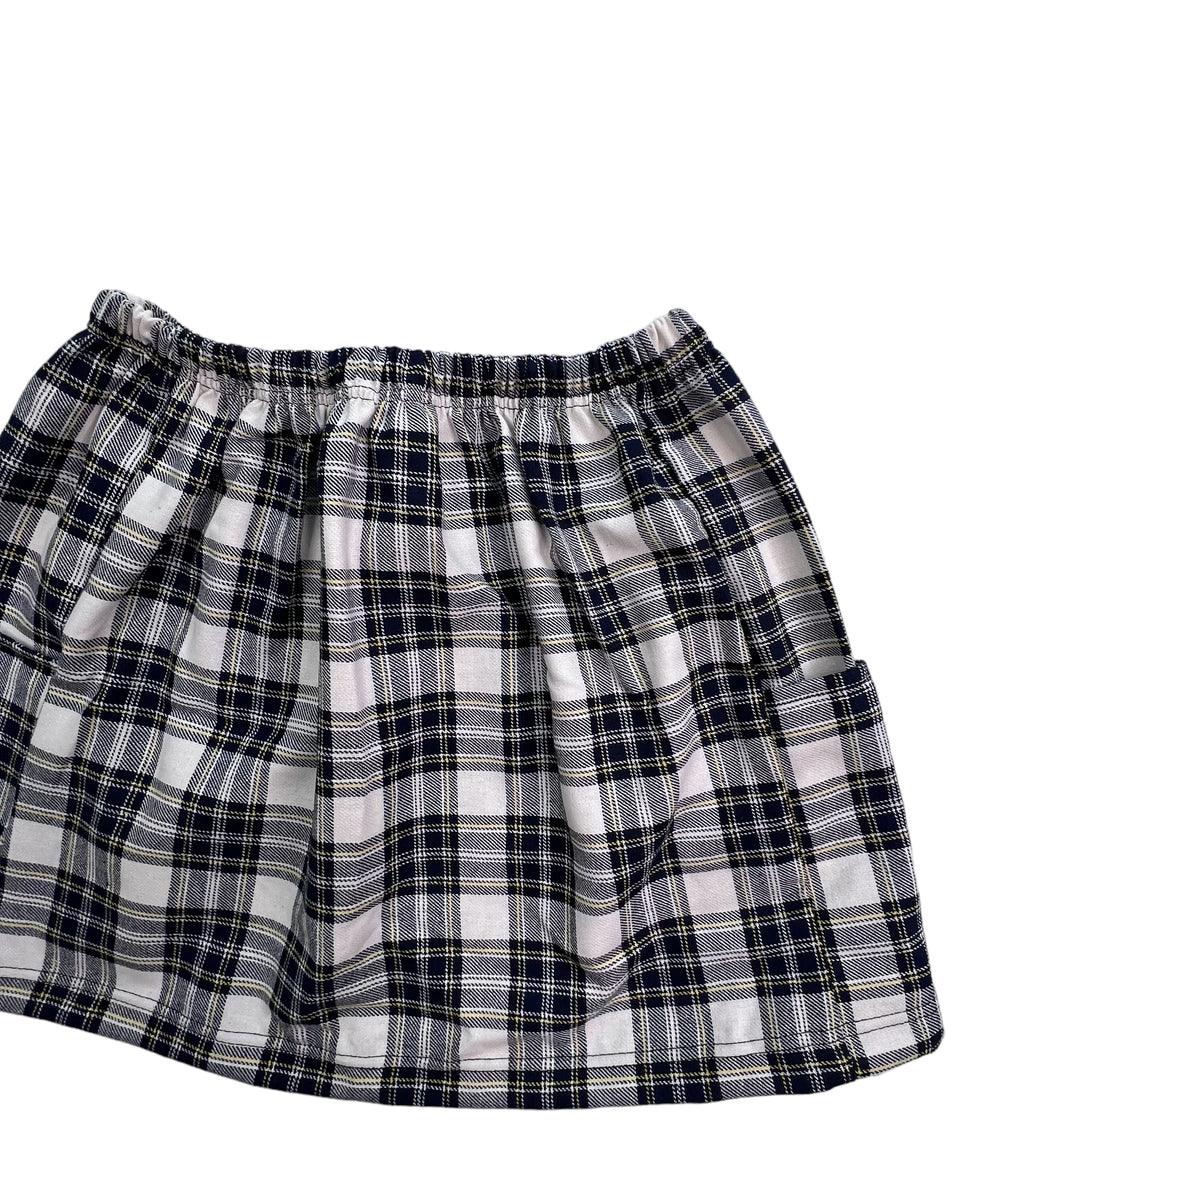 Christiana Skirt in 'Starry Night Plaid' - Ready To Ship